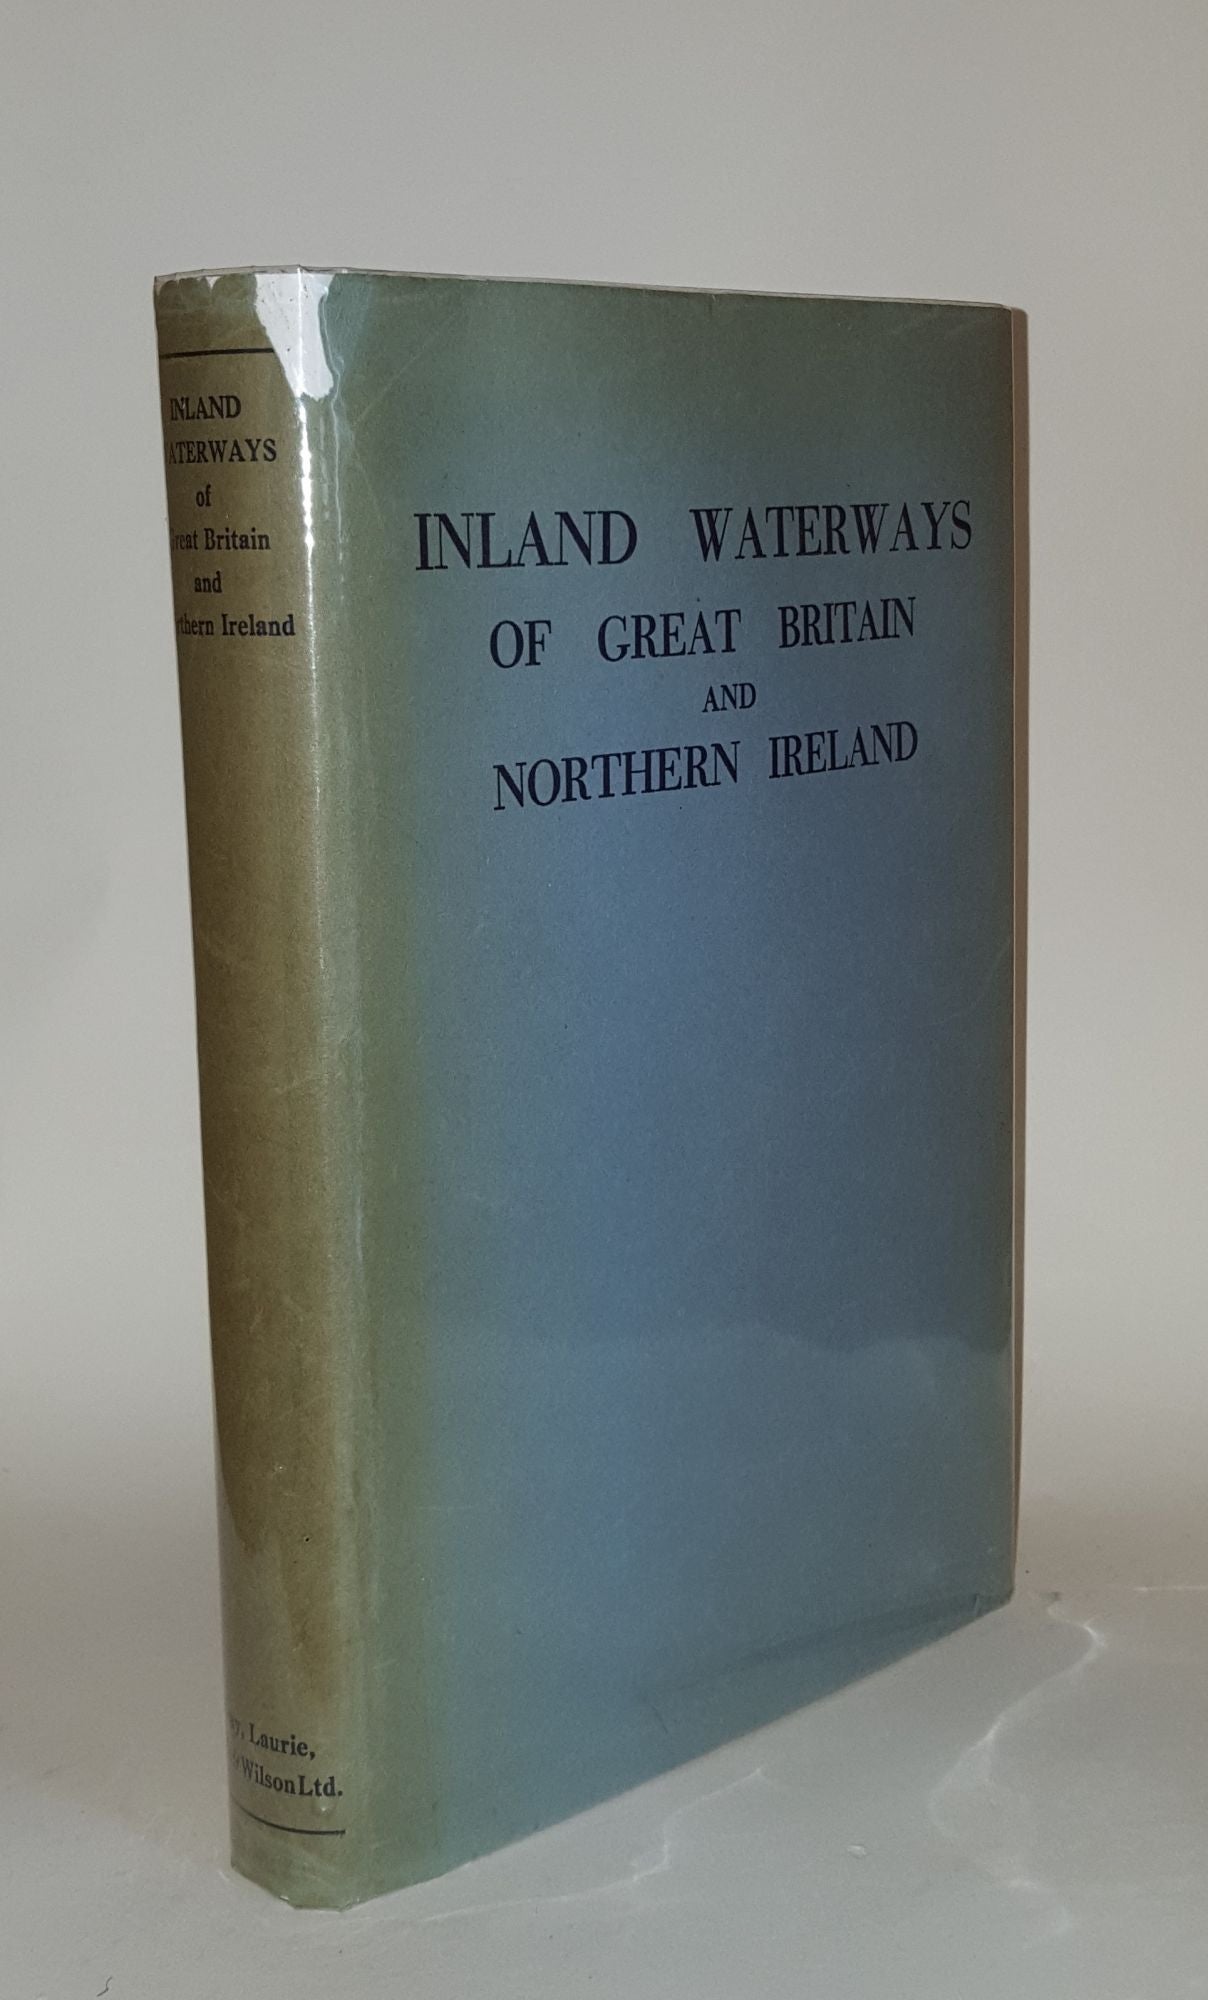 EDWARDS Lewis A. - Inland Waterways of Great Britain and Ireland